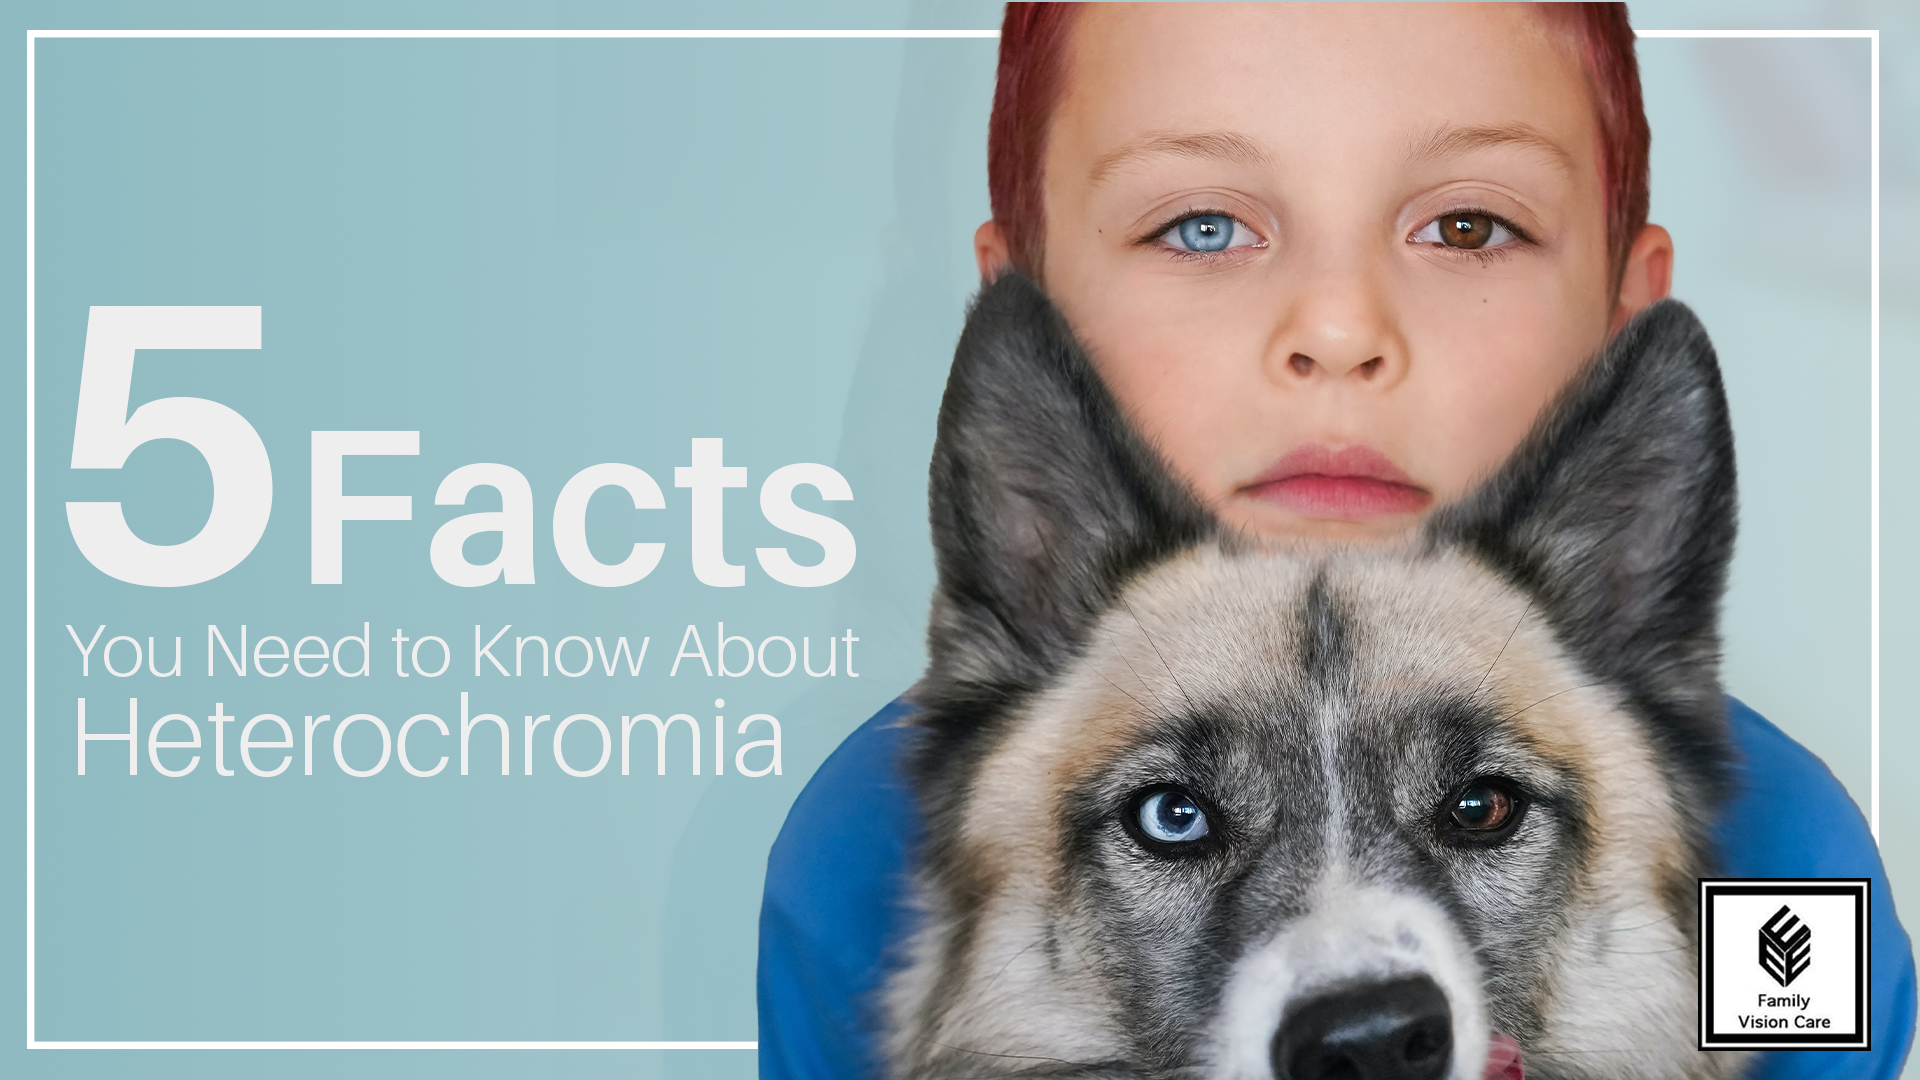 A child and a dog with heterochromia 